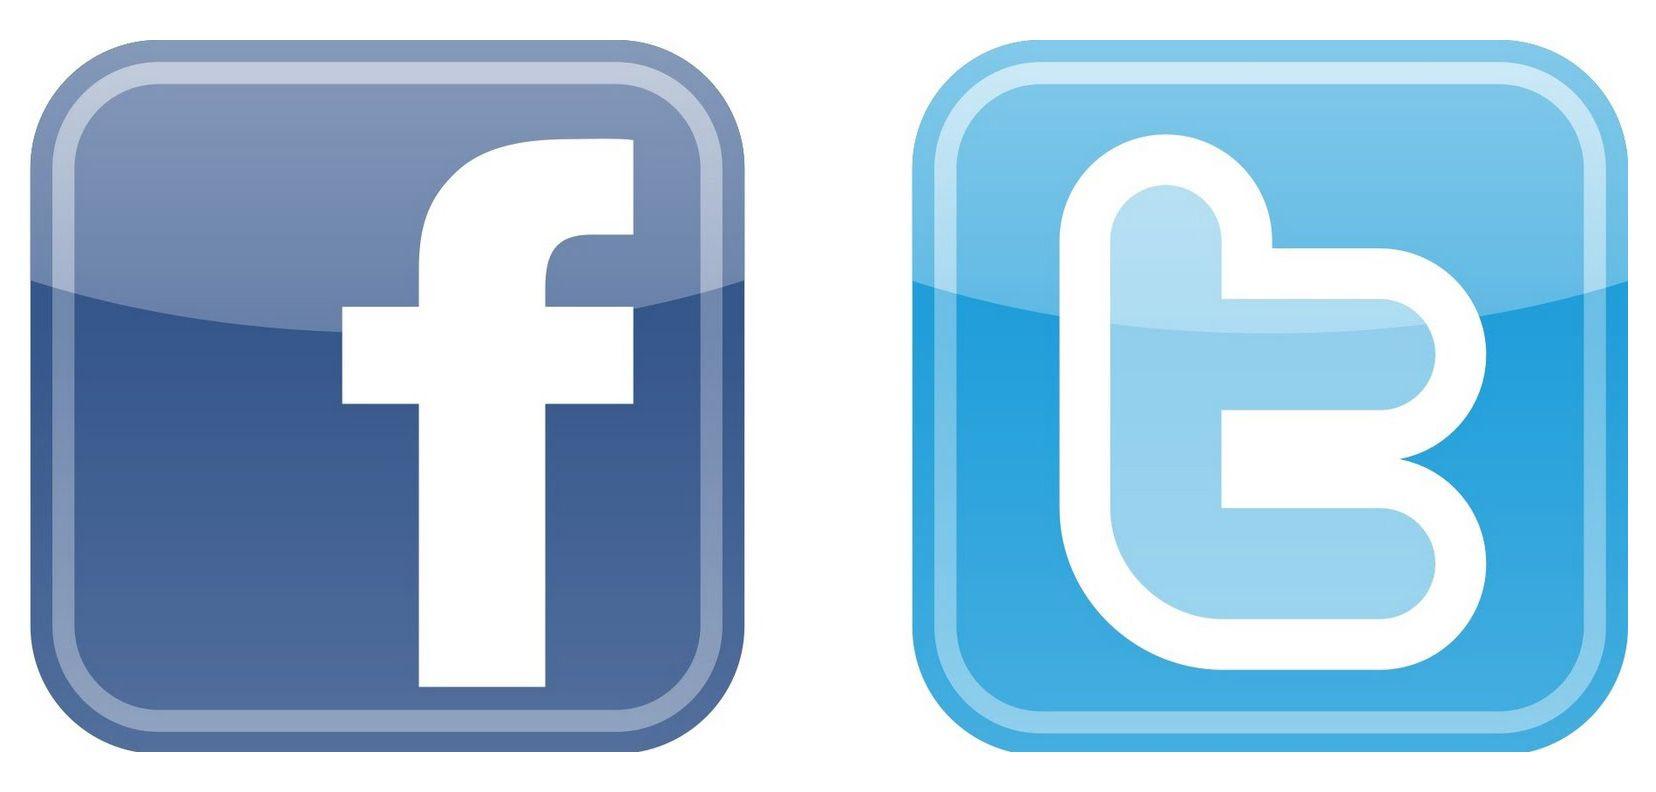 Fecabook Logo - Facebook Icon Vector Png #68296 - Free Icons Library